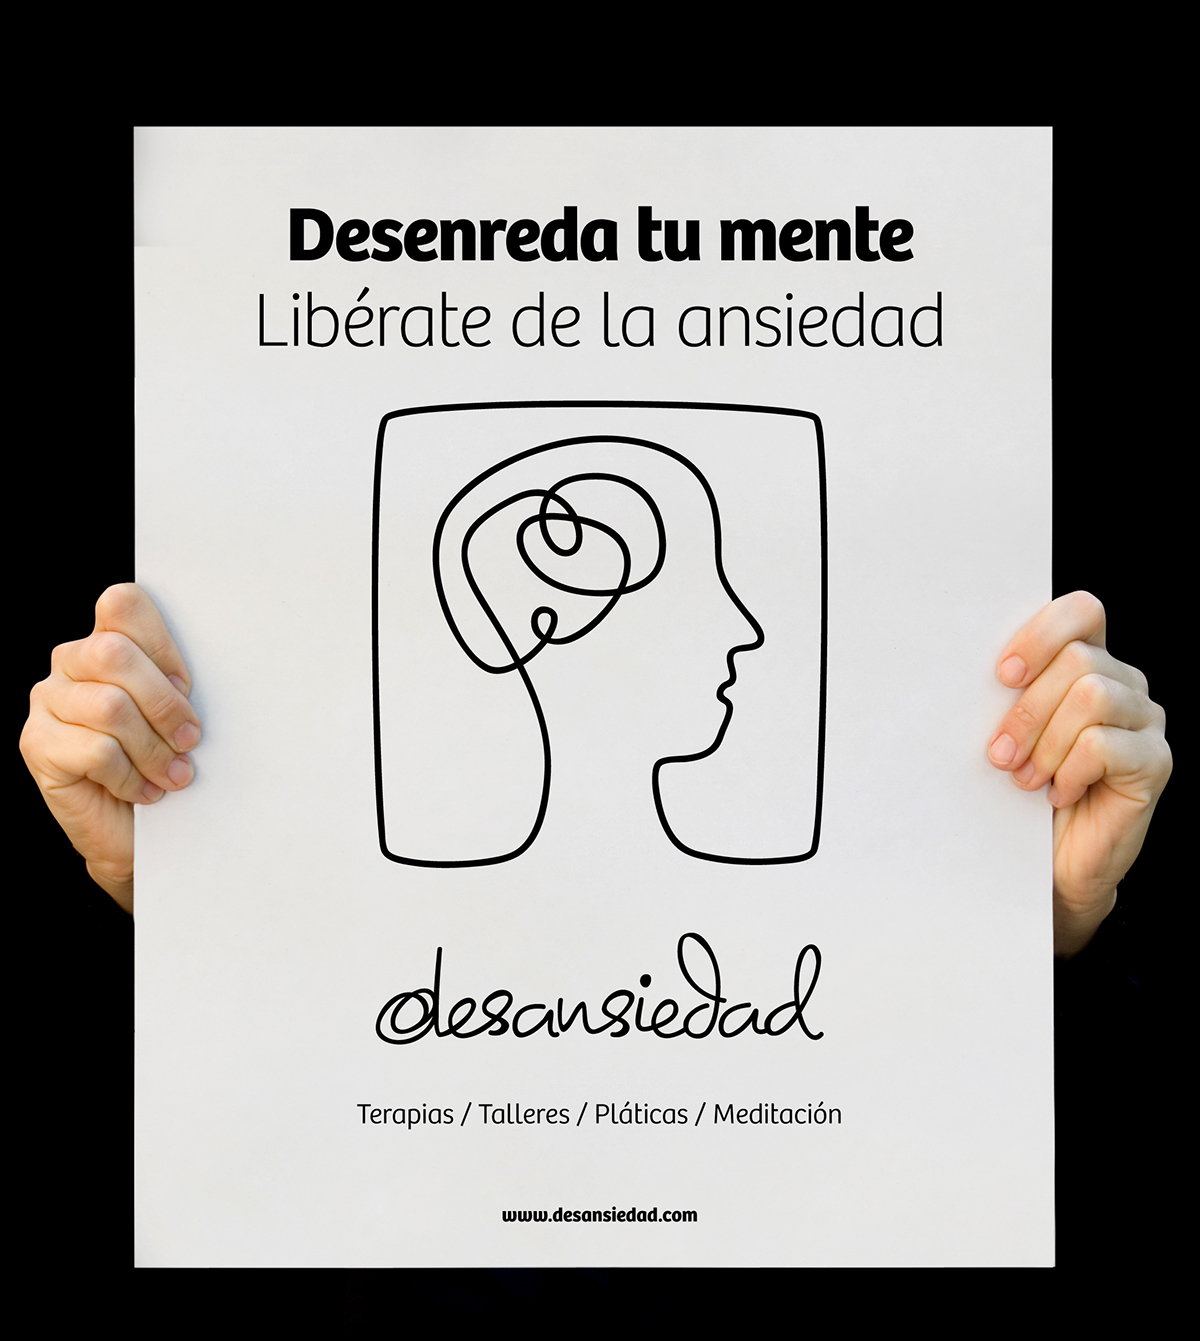 logo psychology therapy mexico Cuernavaca anxiety style life relax Fluency conscious human stress